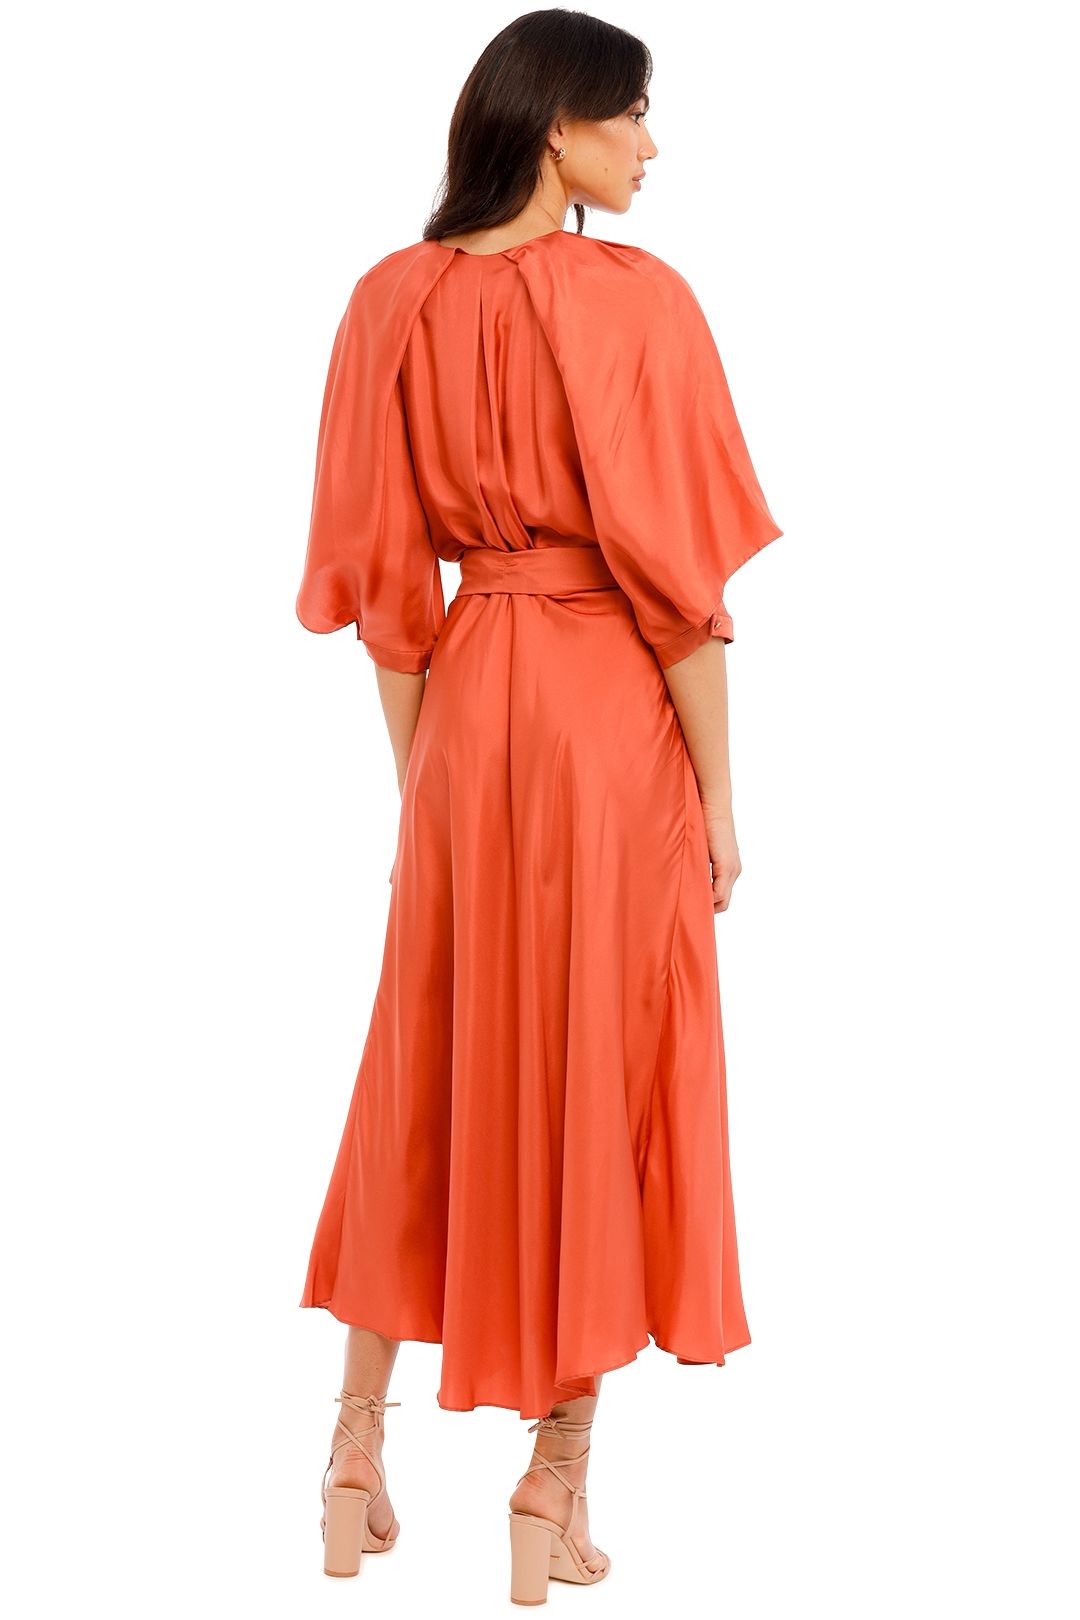 Hire Blush Wrap Dress in Sunset Pink, Ginger and Smart